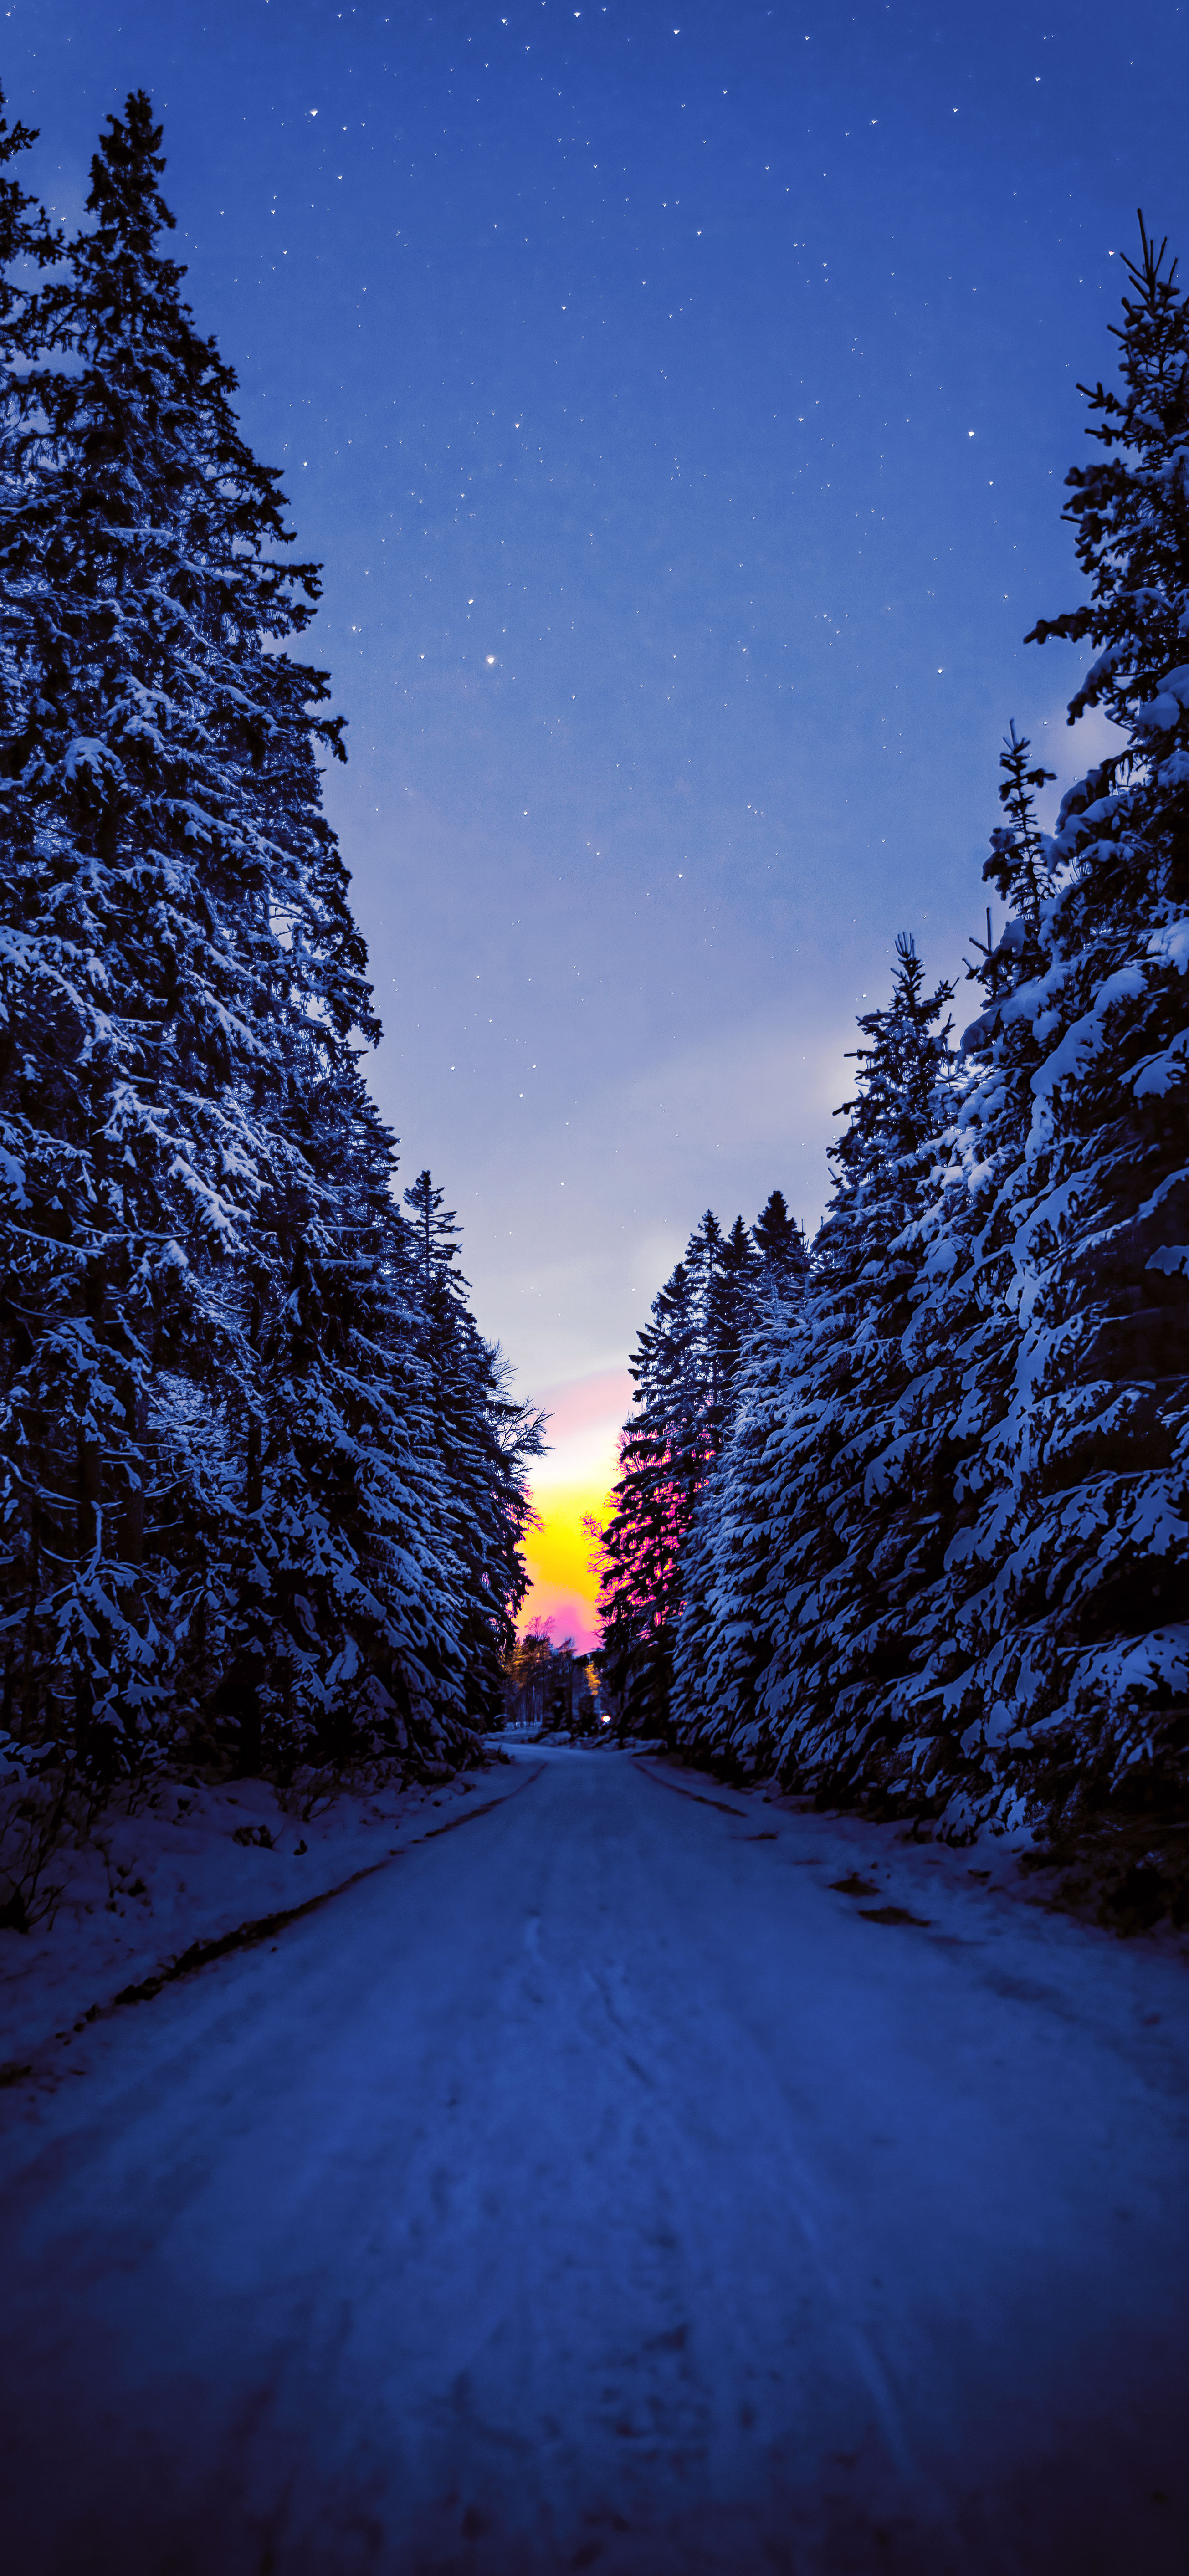 Road Between Snow Covered Trees Wallpapers